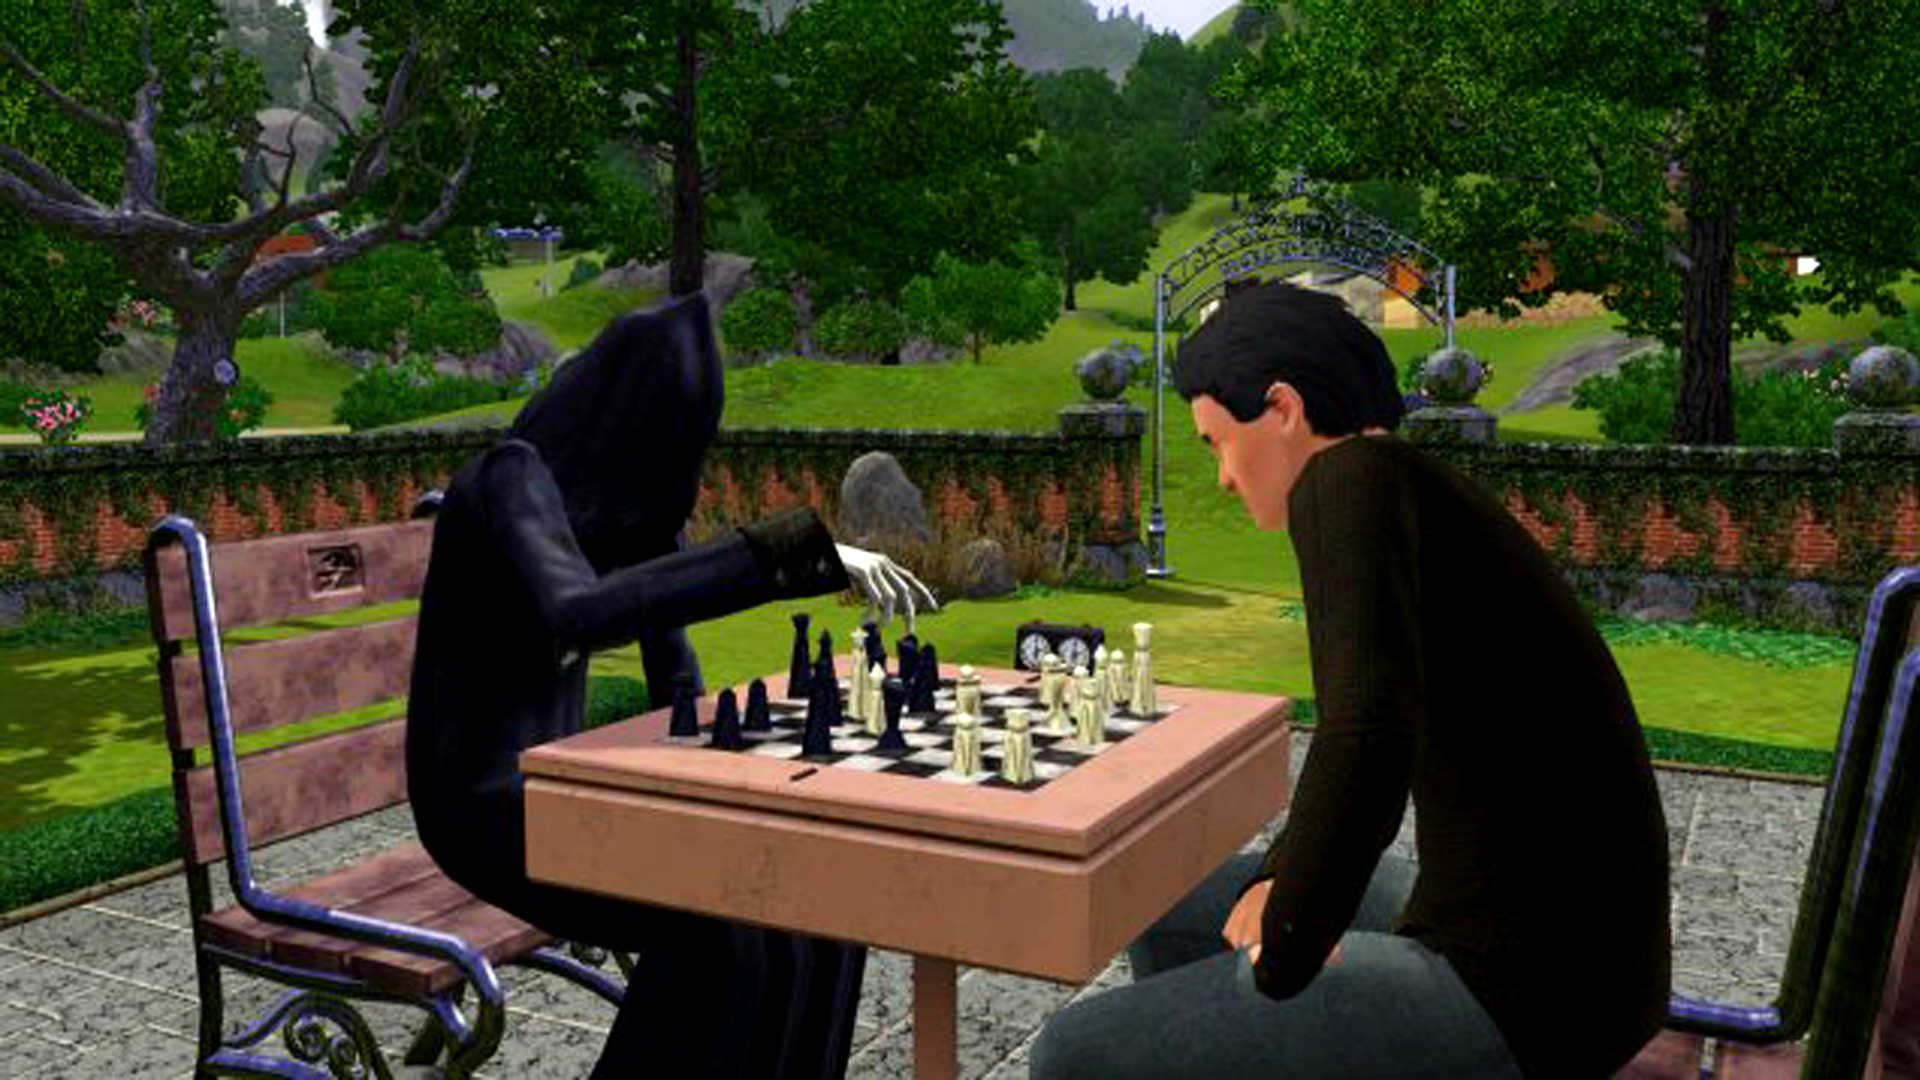 Guide: Death Types and Killing Sims in The Sims 4